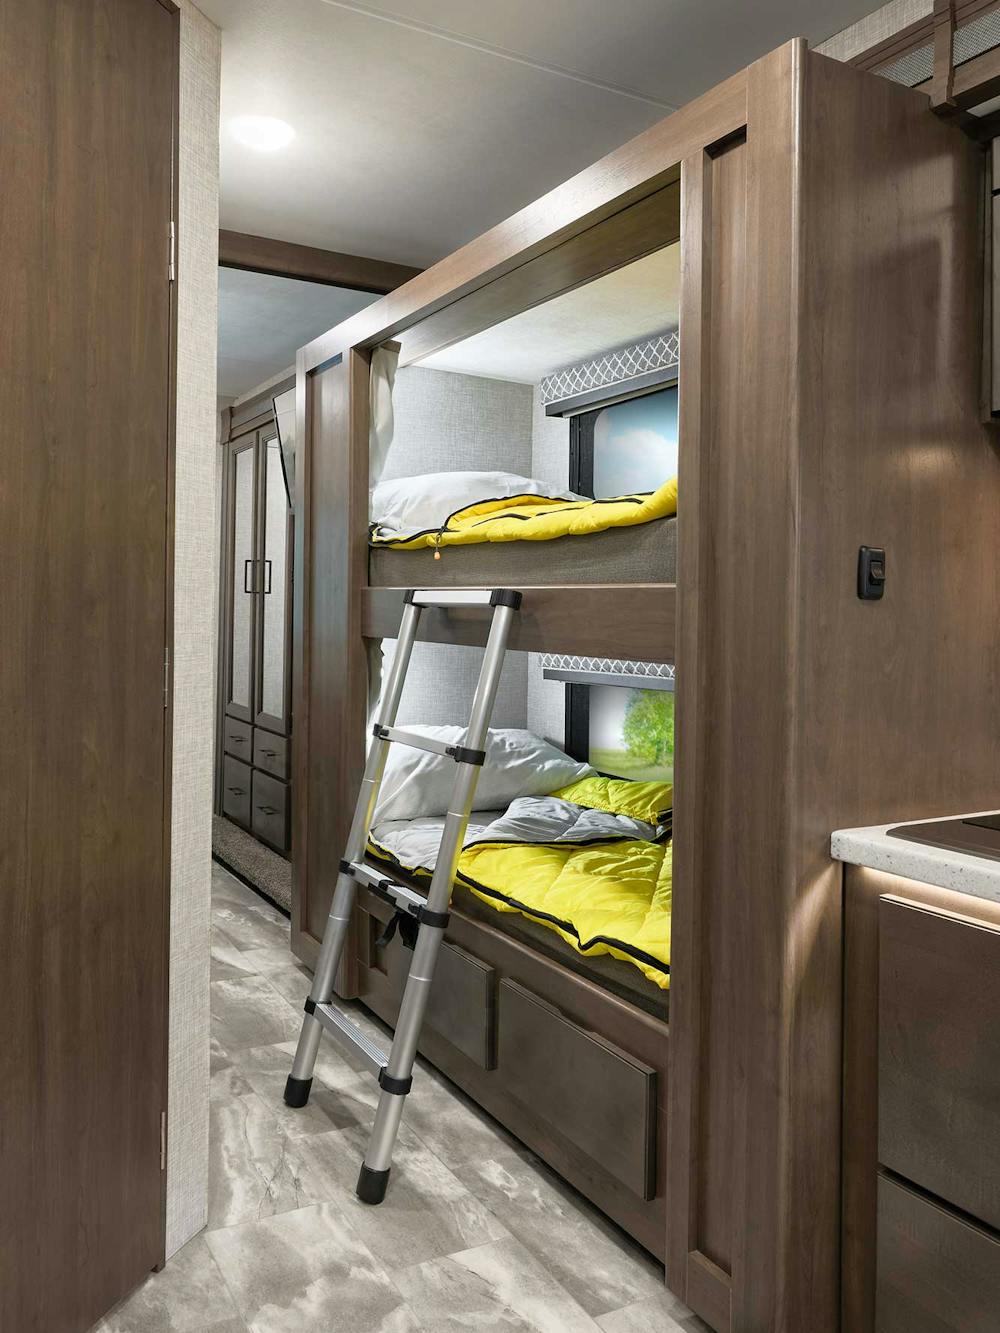 How To Maximize Storage And Organization In An RV - THOR Industries